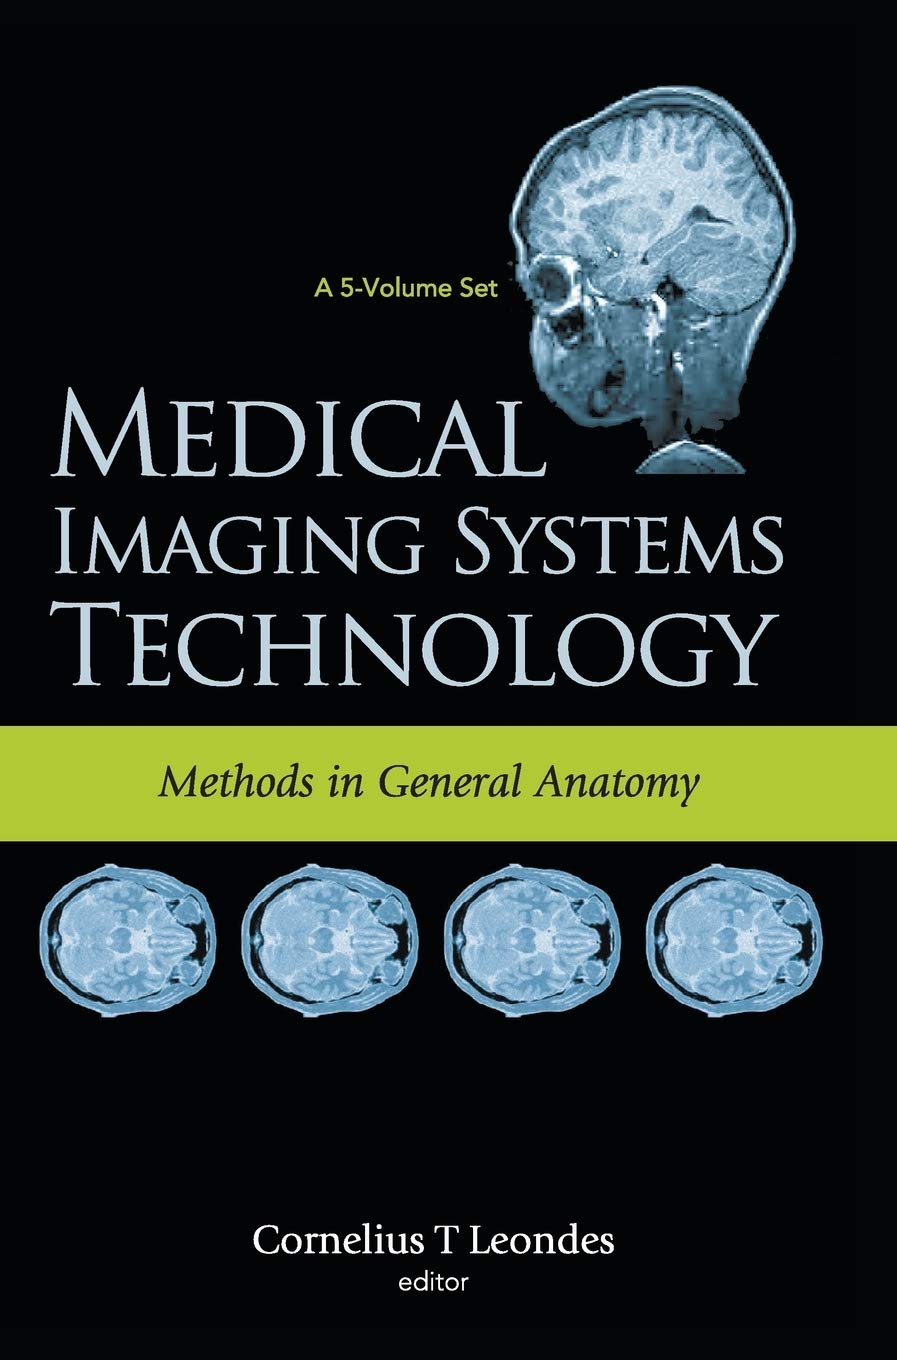 MEDICAL IMAGING SYSTEMS TECHNOLOGY - VOLUME 3: METHODS IN GENERAL ANATOMY